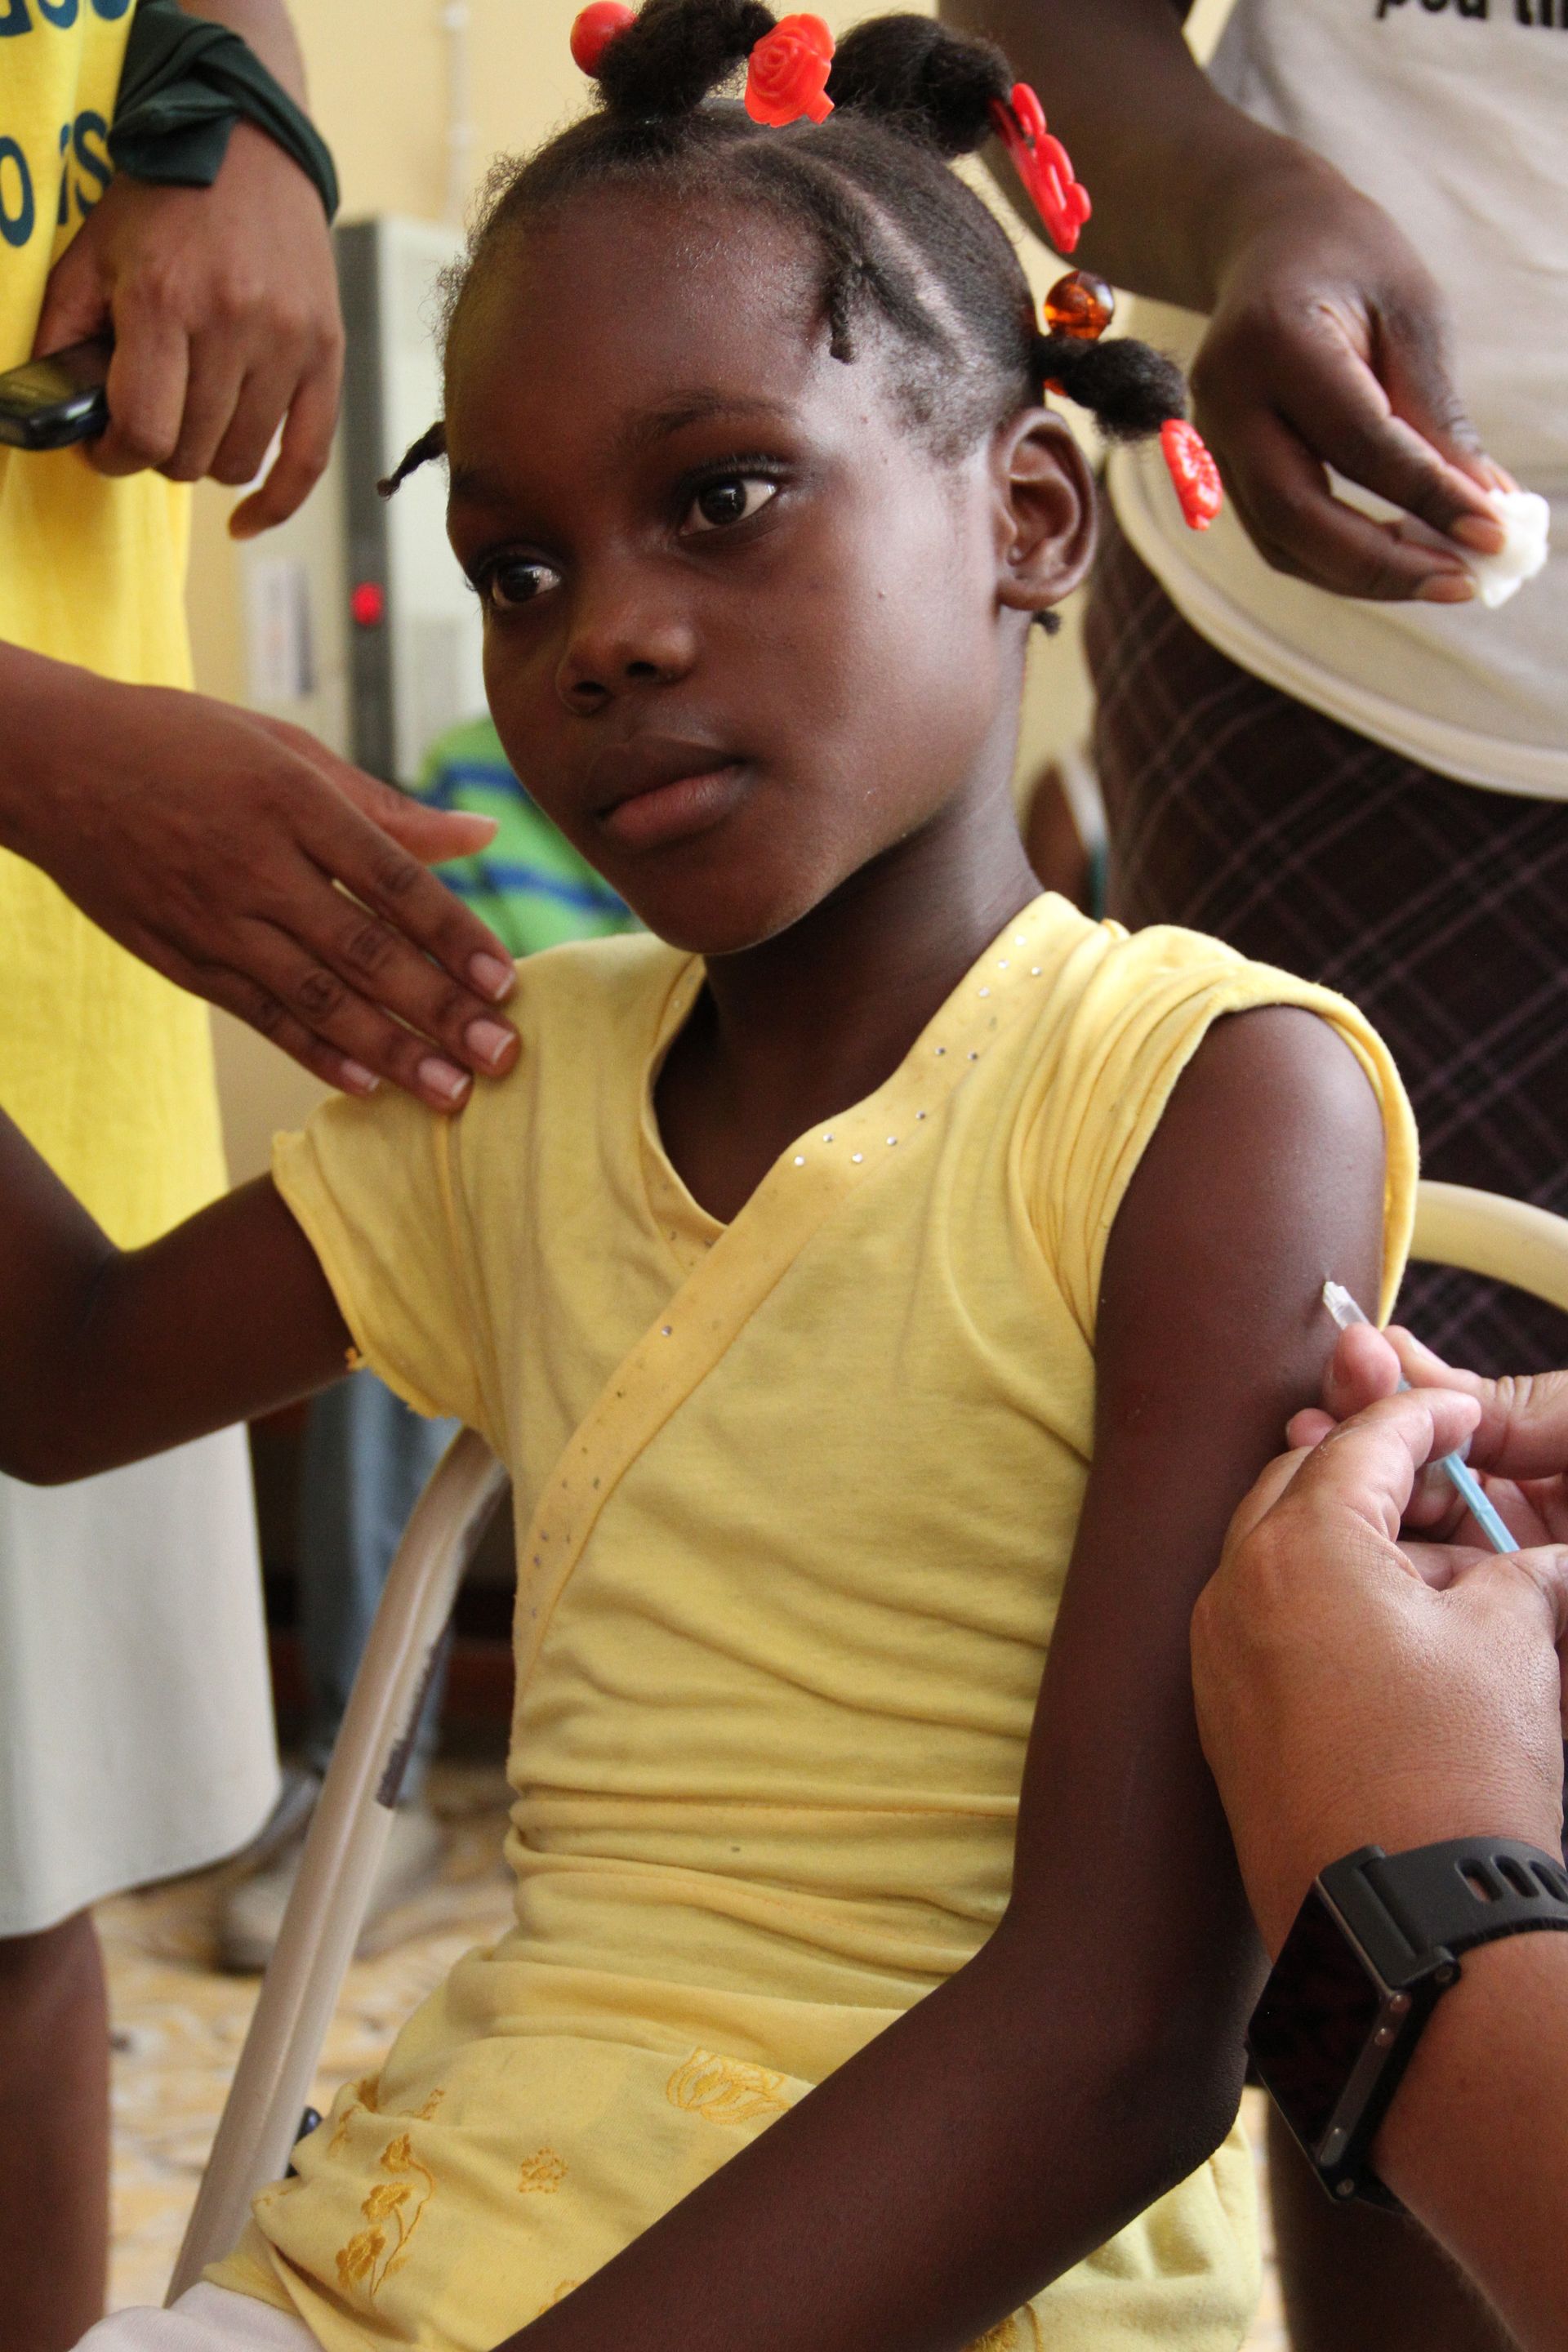 A young Haitian girl sitting down and receiving an immunization in her arm.